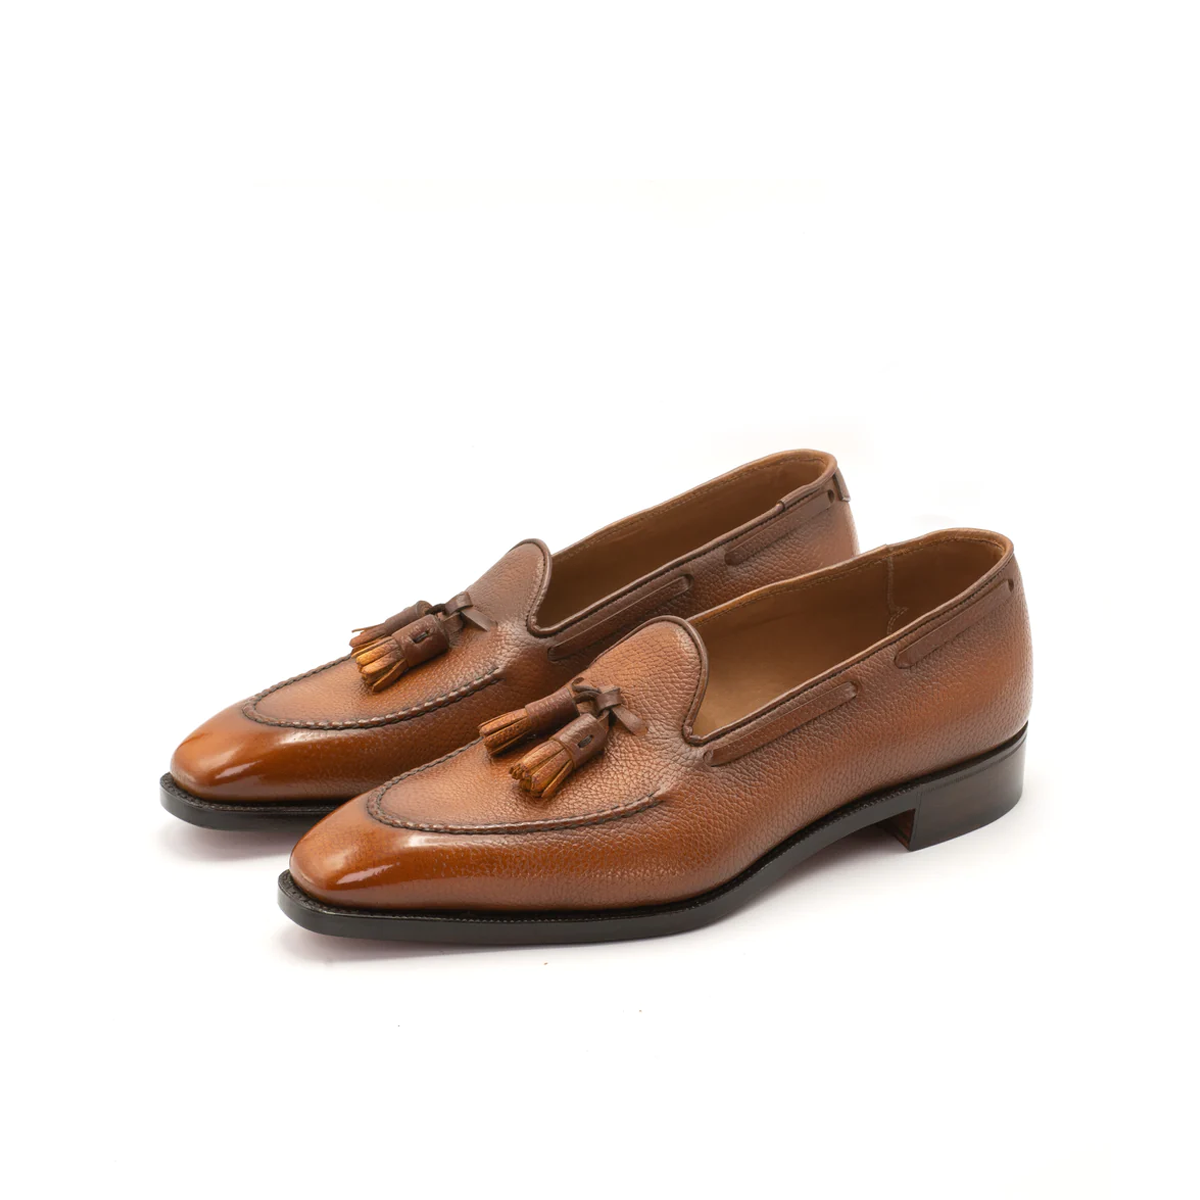 Sybil Compton Loafers